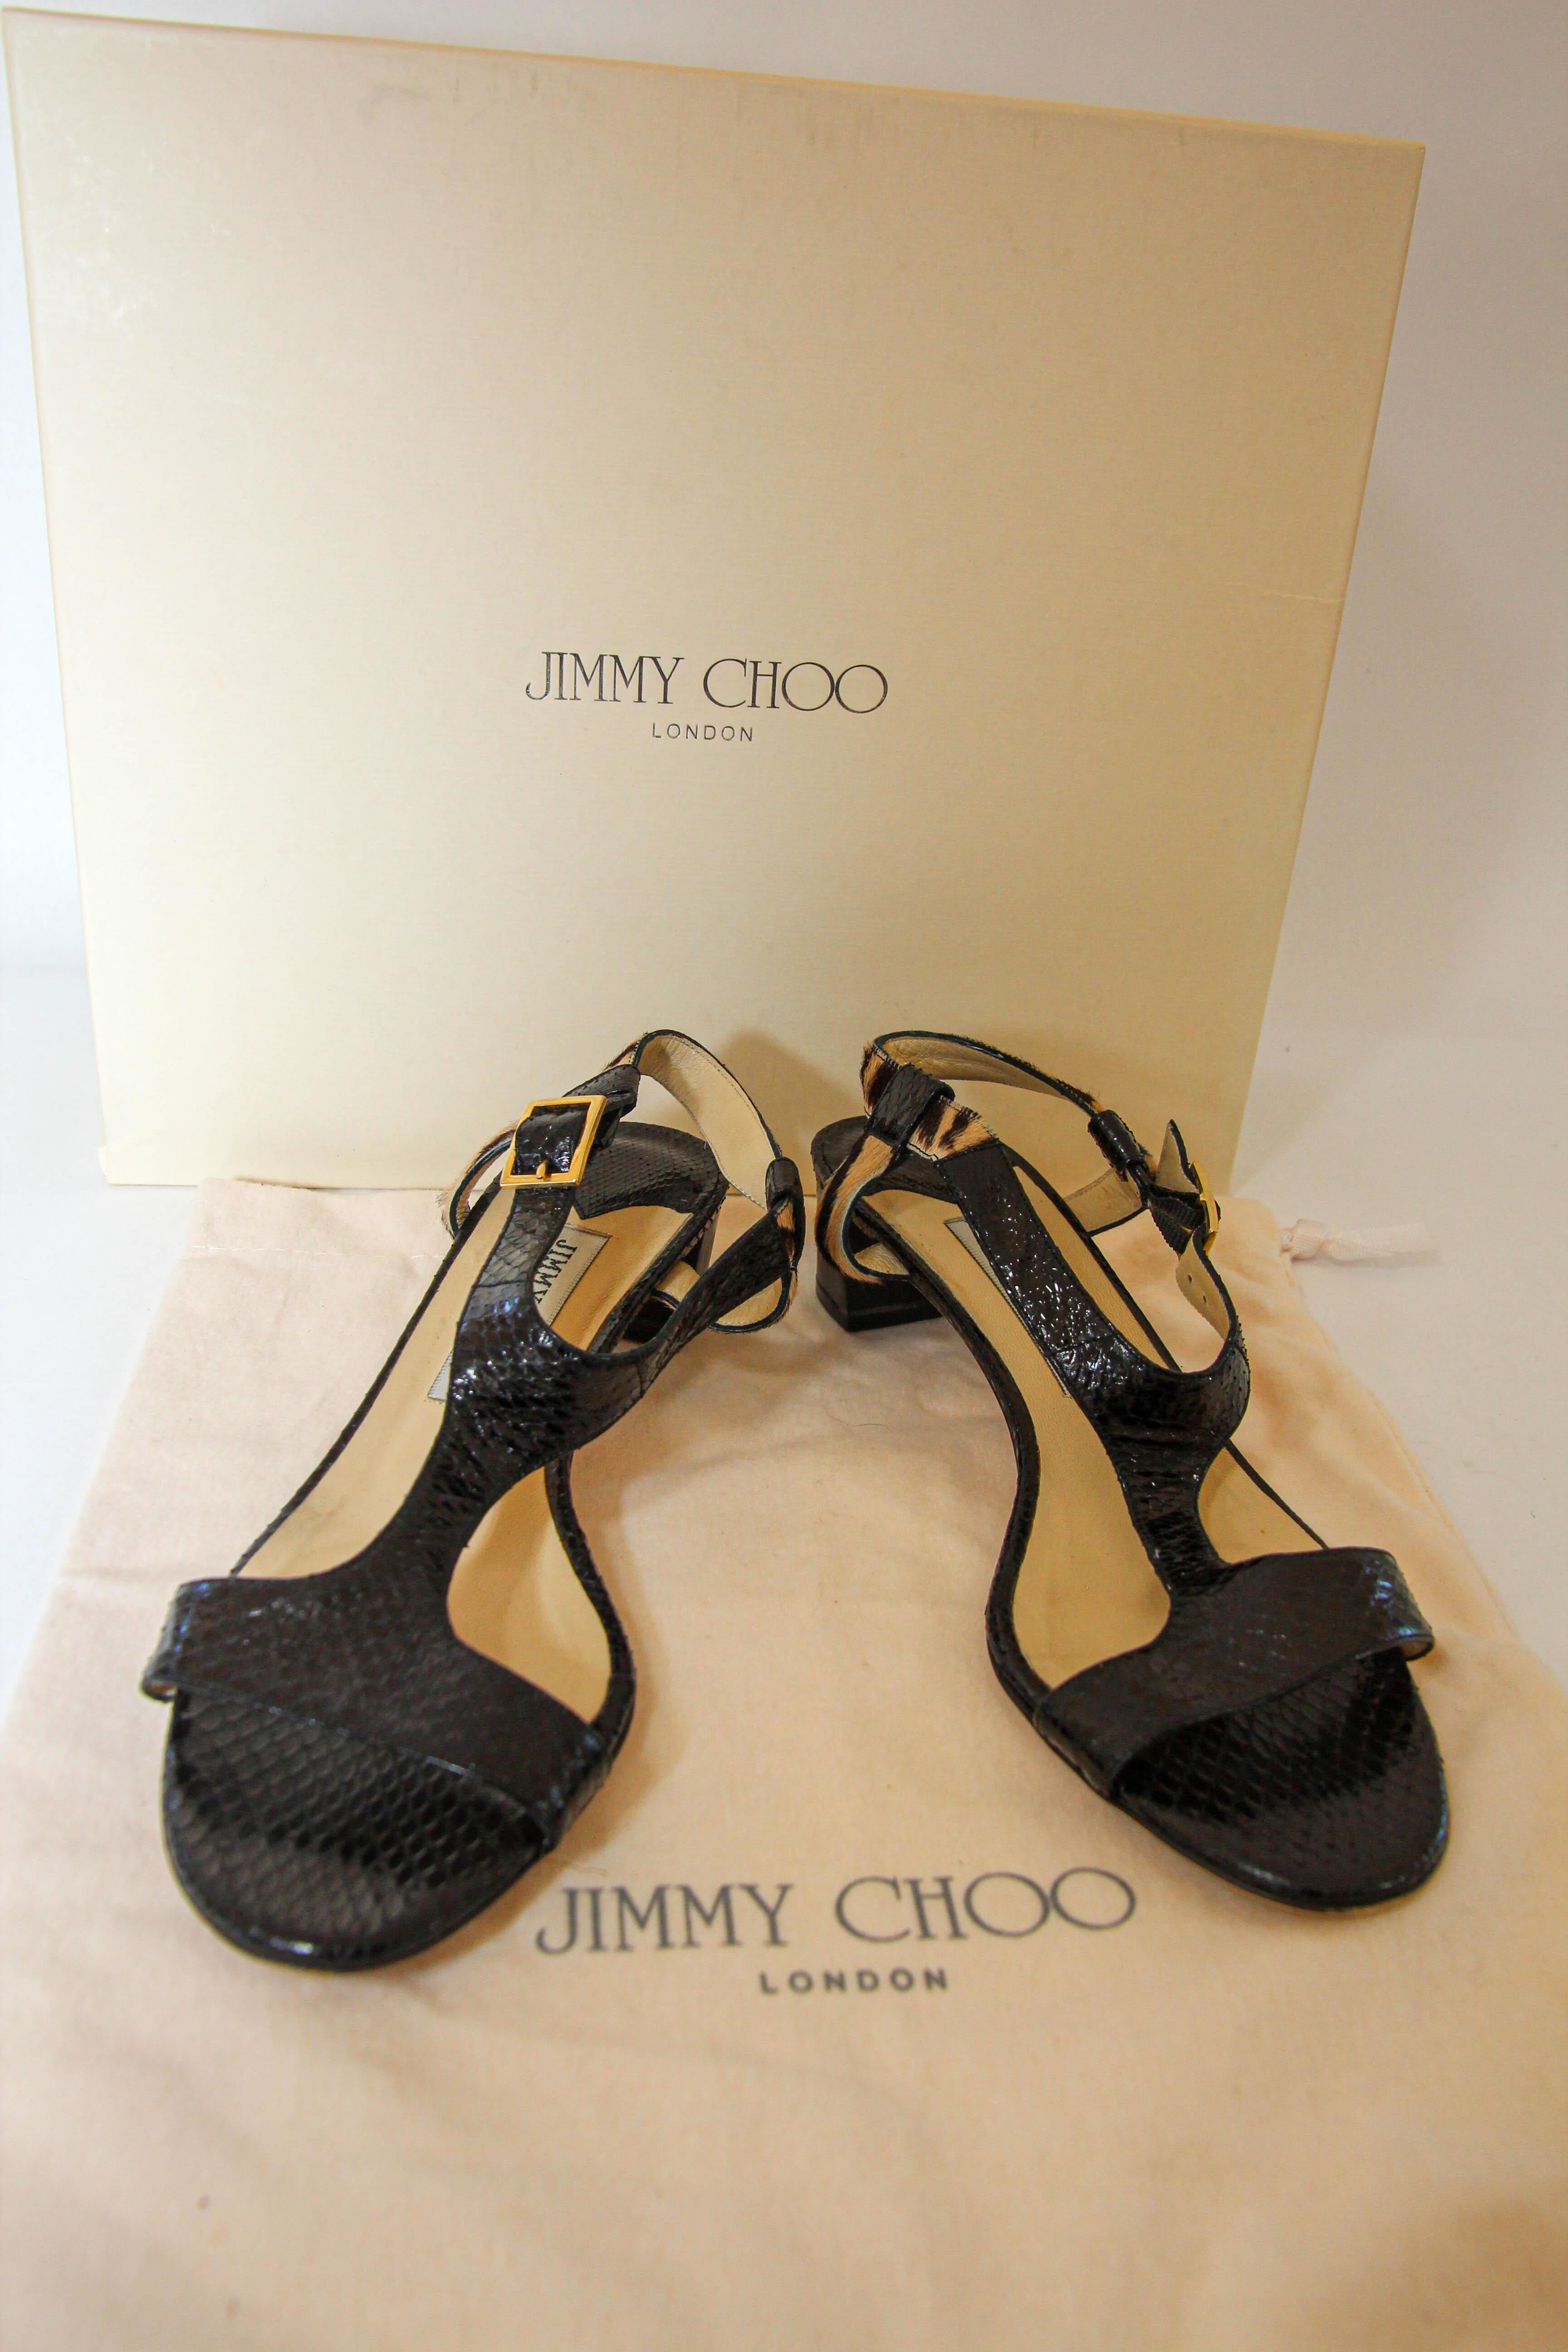 JIMMY CHOO London Black Leather Jin T-Strap Slingback Shoes 38 In Good Condition For Sale In North Hollywood, CA